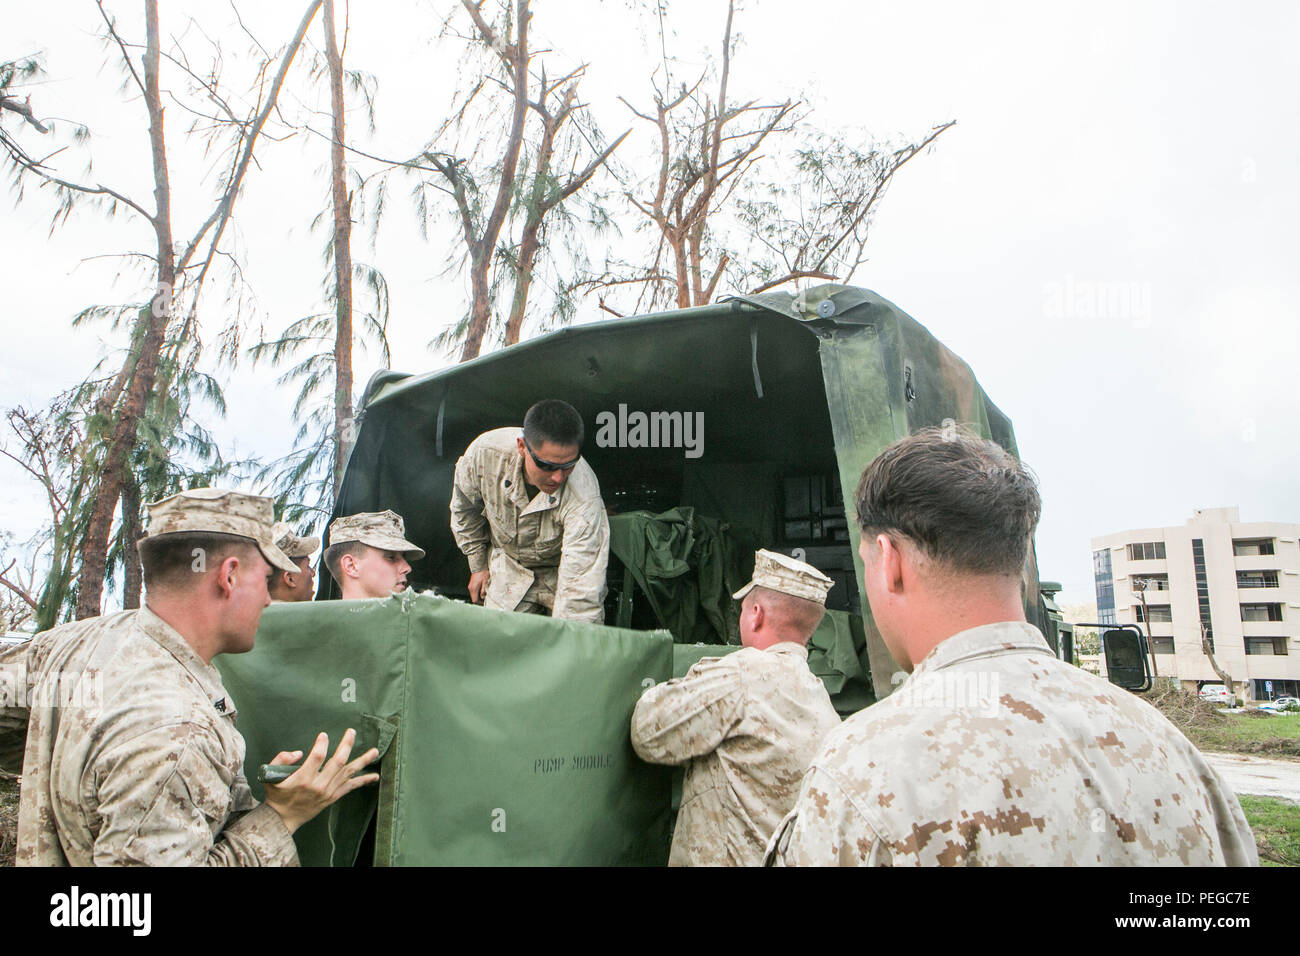 U.S. Marines from Combat Logistics Battalion 31, 31st Marine Expeditionary Unit, unload a Light Weight Purification System from a Humvee in Saipan, Aug 10, 2015. The 31st MEU and the ships of the Bonhomme Richard Amphibious Ready Group are assisting federal and local agencies with distributing emergency relief supplies to Saipan after it was struck by Typhoon Soudelor, Aug. 2-3. (U.S. Marine Corps photo by Lance Cpl. Brian Bekkala/Released) Stock Photo